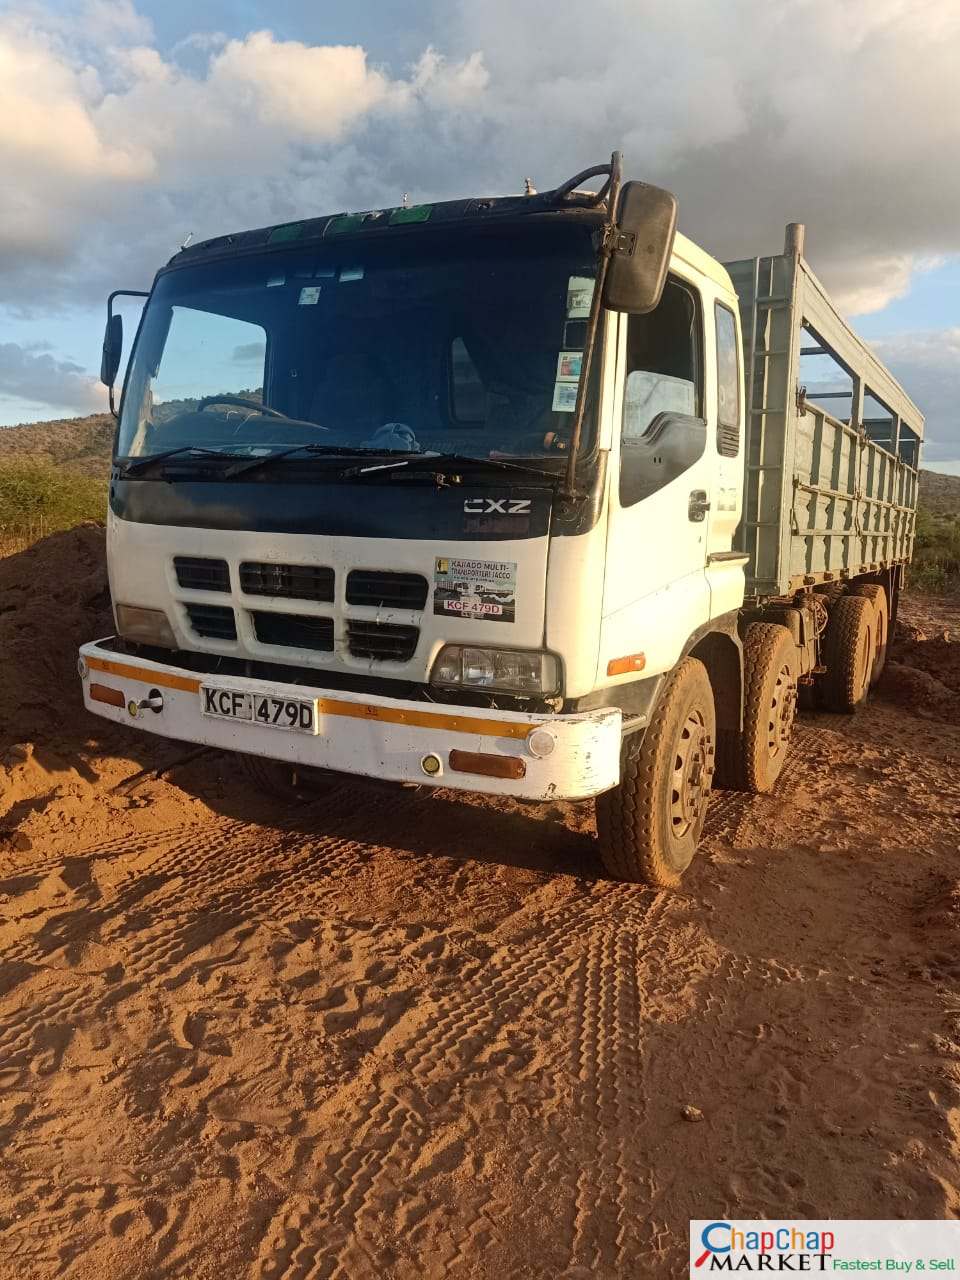 Cars Cars For Sale/Vehicles-ISUZU NHR CXZ LORRY QUICK SALE You Pay 30% DEPOSIT INSTALLMENTS EXCLUSIVE